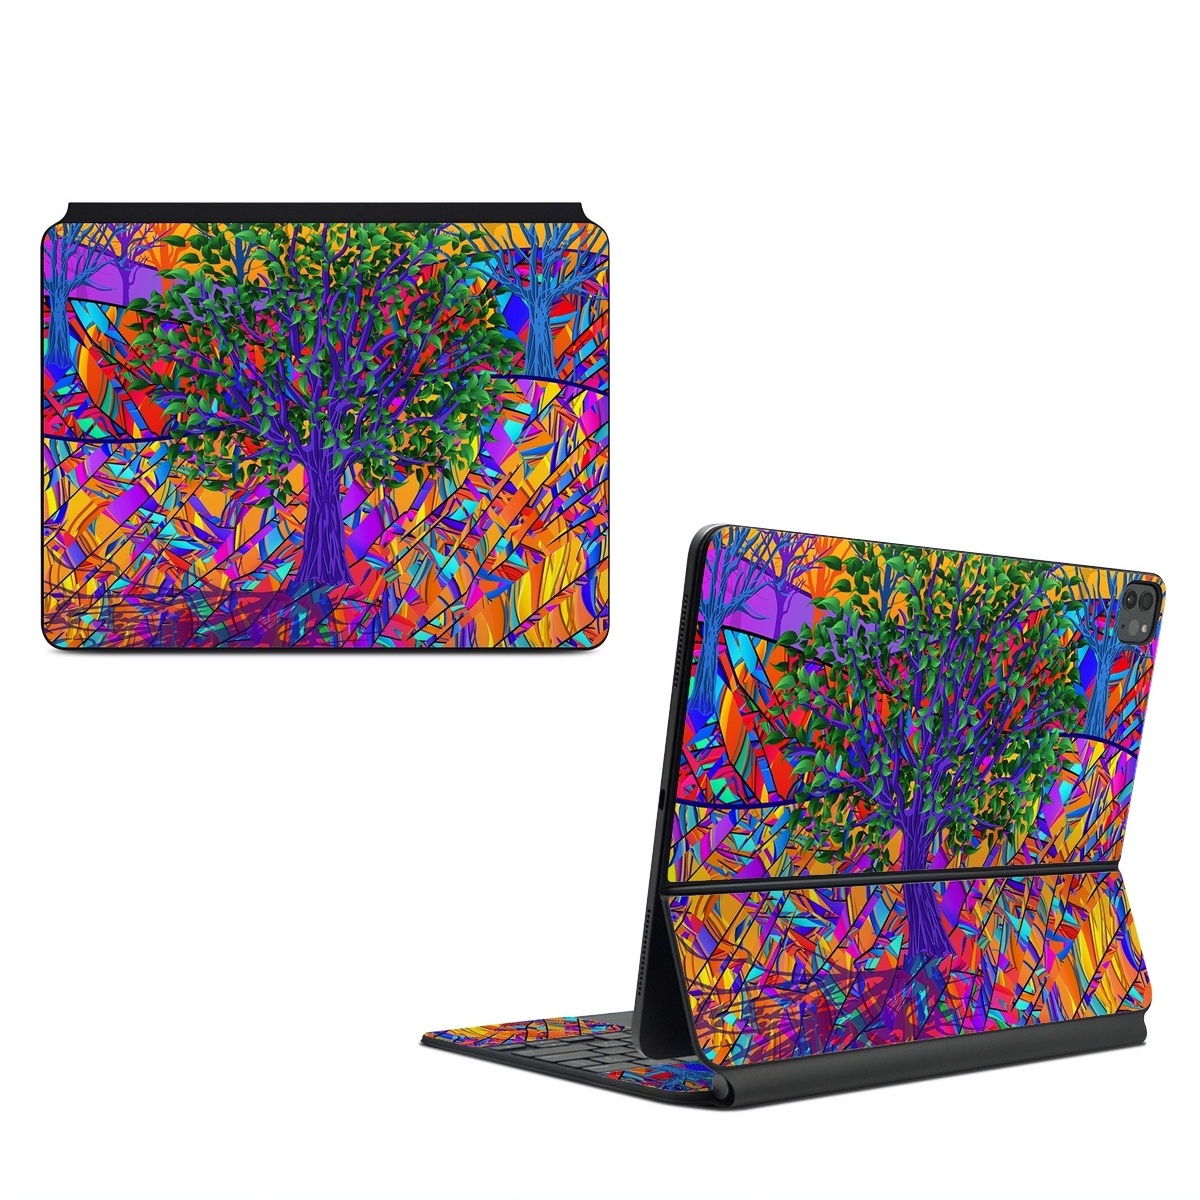 Magic Keyboard for iPad Series Skin design of Psychedelic art, Pattern, Visual arts, Art, Plant, Acrylic paint, Modern art, with green, purple, orange, blue, purple, yellow, red colors